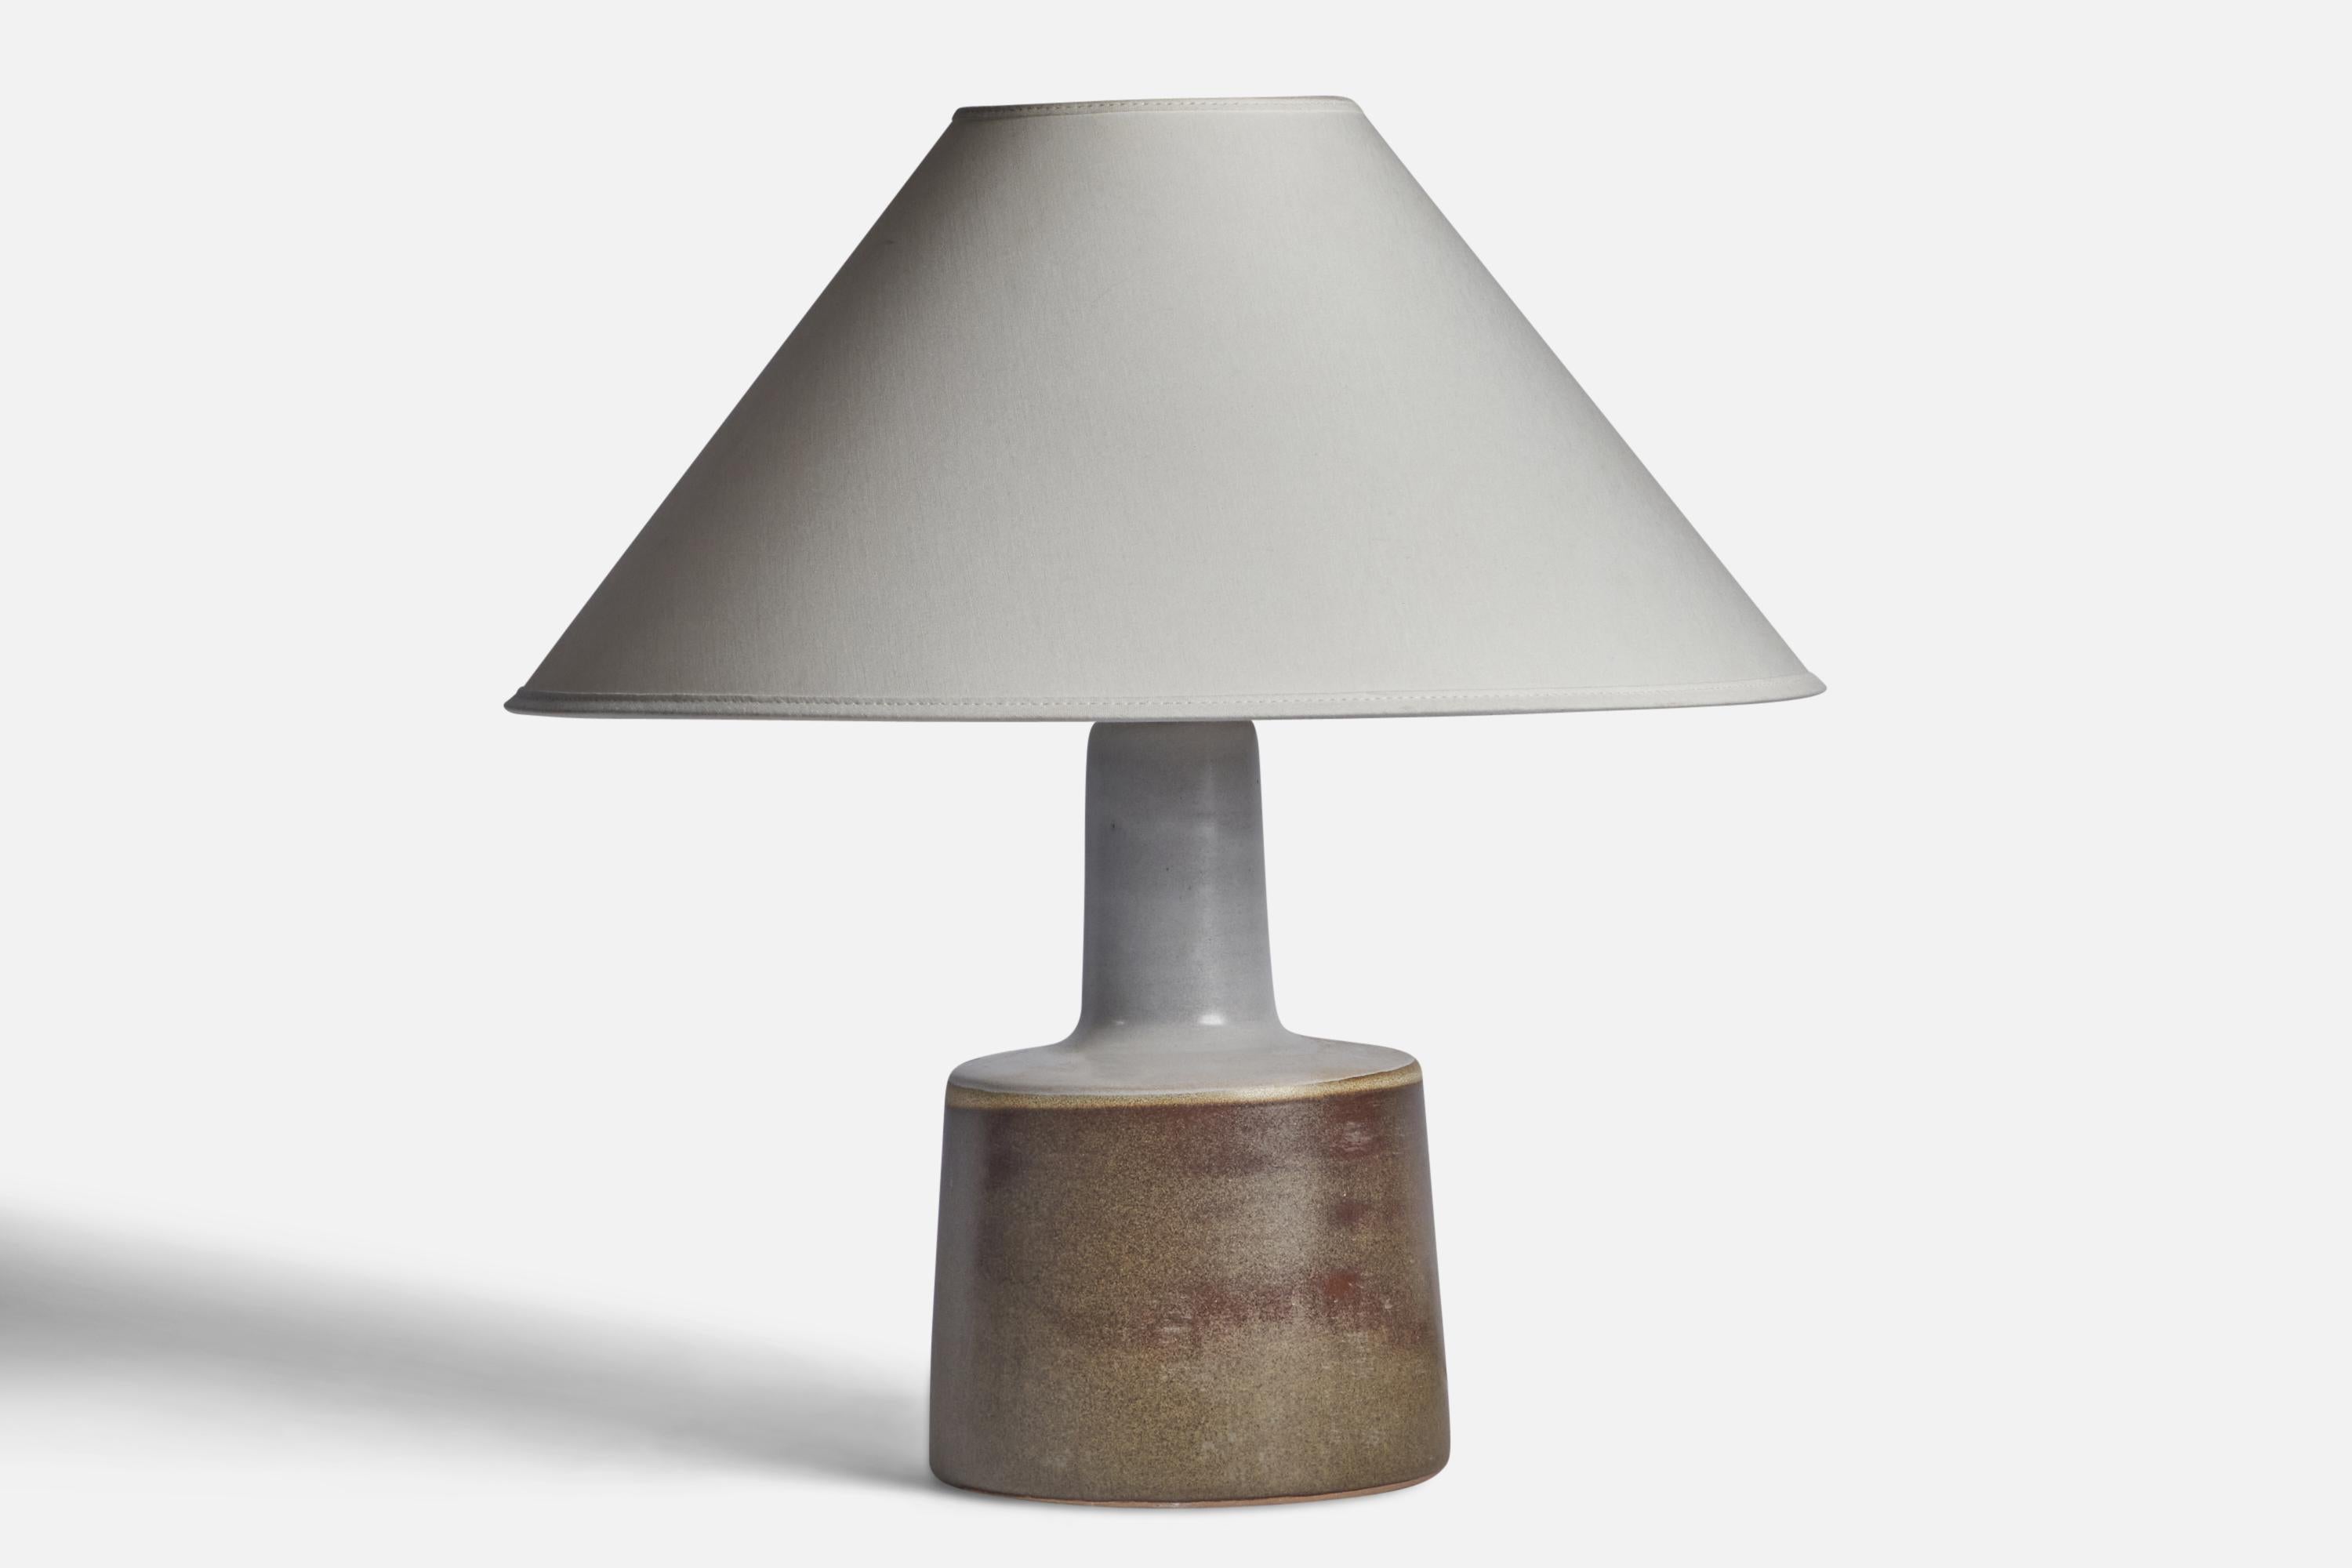 A grey and brown-glazed ceramic table lamp designed by Jane & Gordon Martz and produced by Marshall Studios, USA, 1960s.

Dimensions of Lamp (inches): 12.25” H x 6.25” Diameter
Dimensions of Shade (inches): 4.5” Top Diameter x 15.75” Bottom Diameter